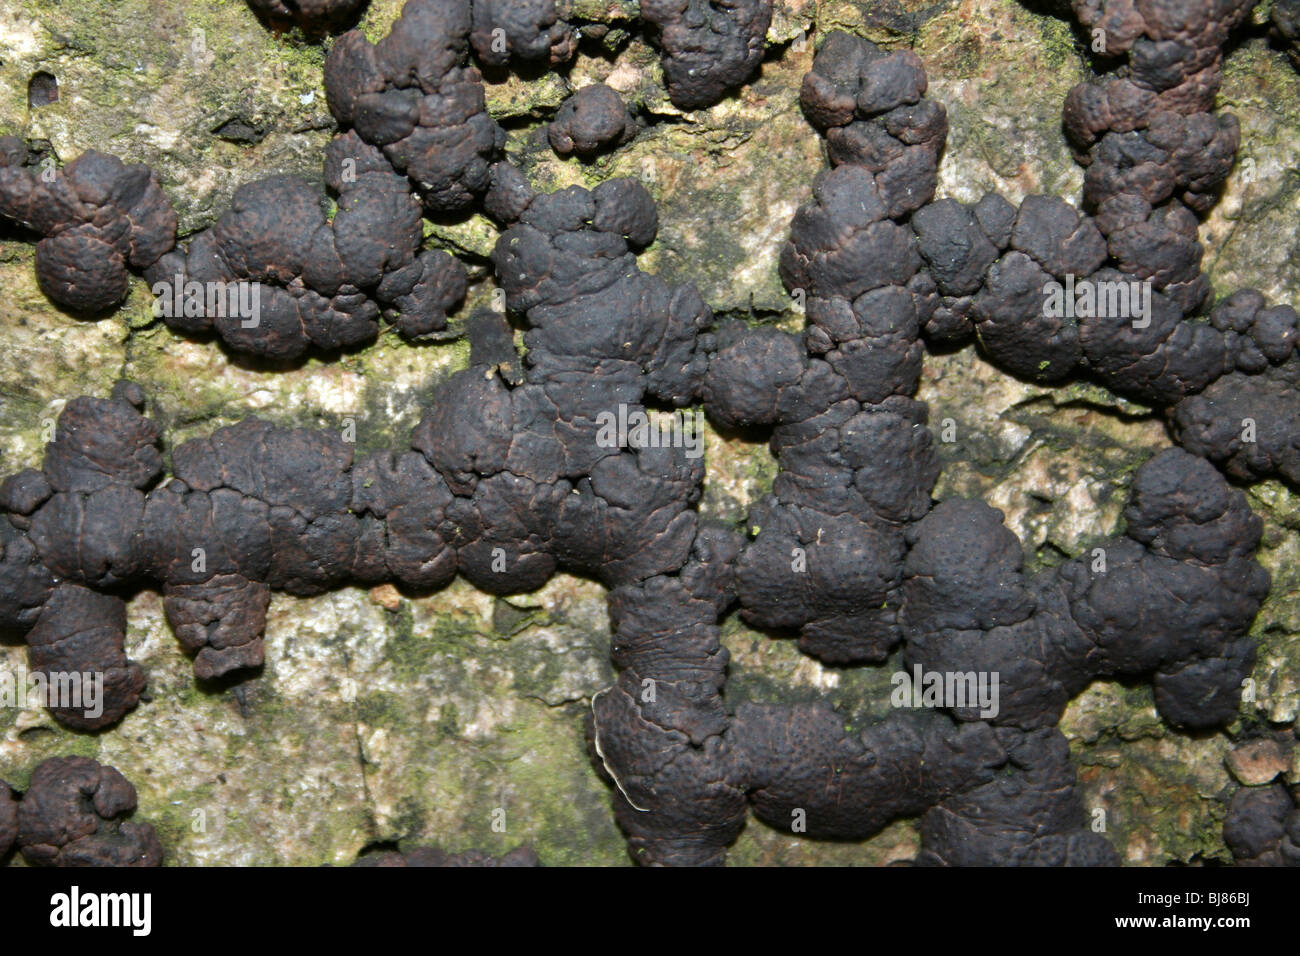 Birch Woodwart Hypoxylon multiforme Unusually Seen On A Log Of Another Species Of Deciduous Tree Stock Photo